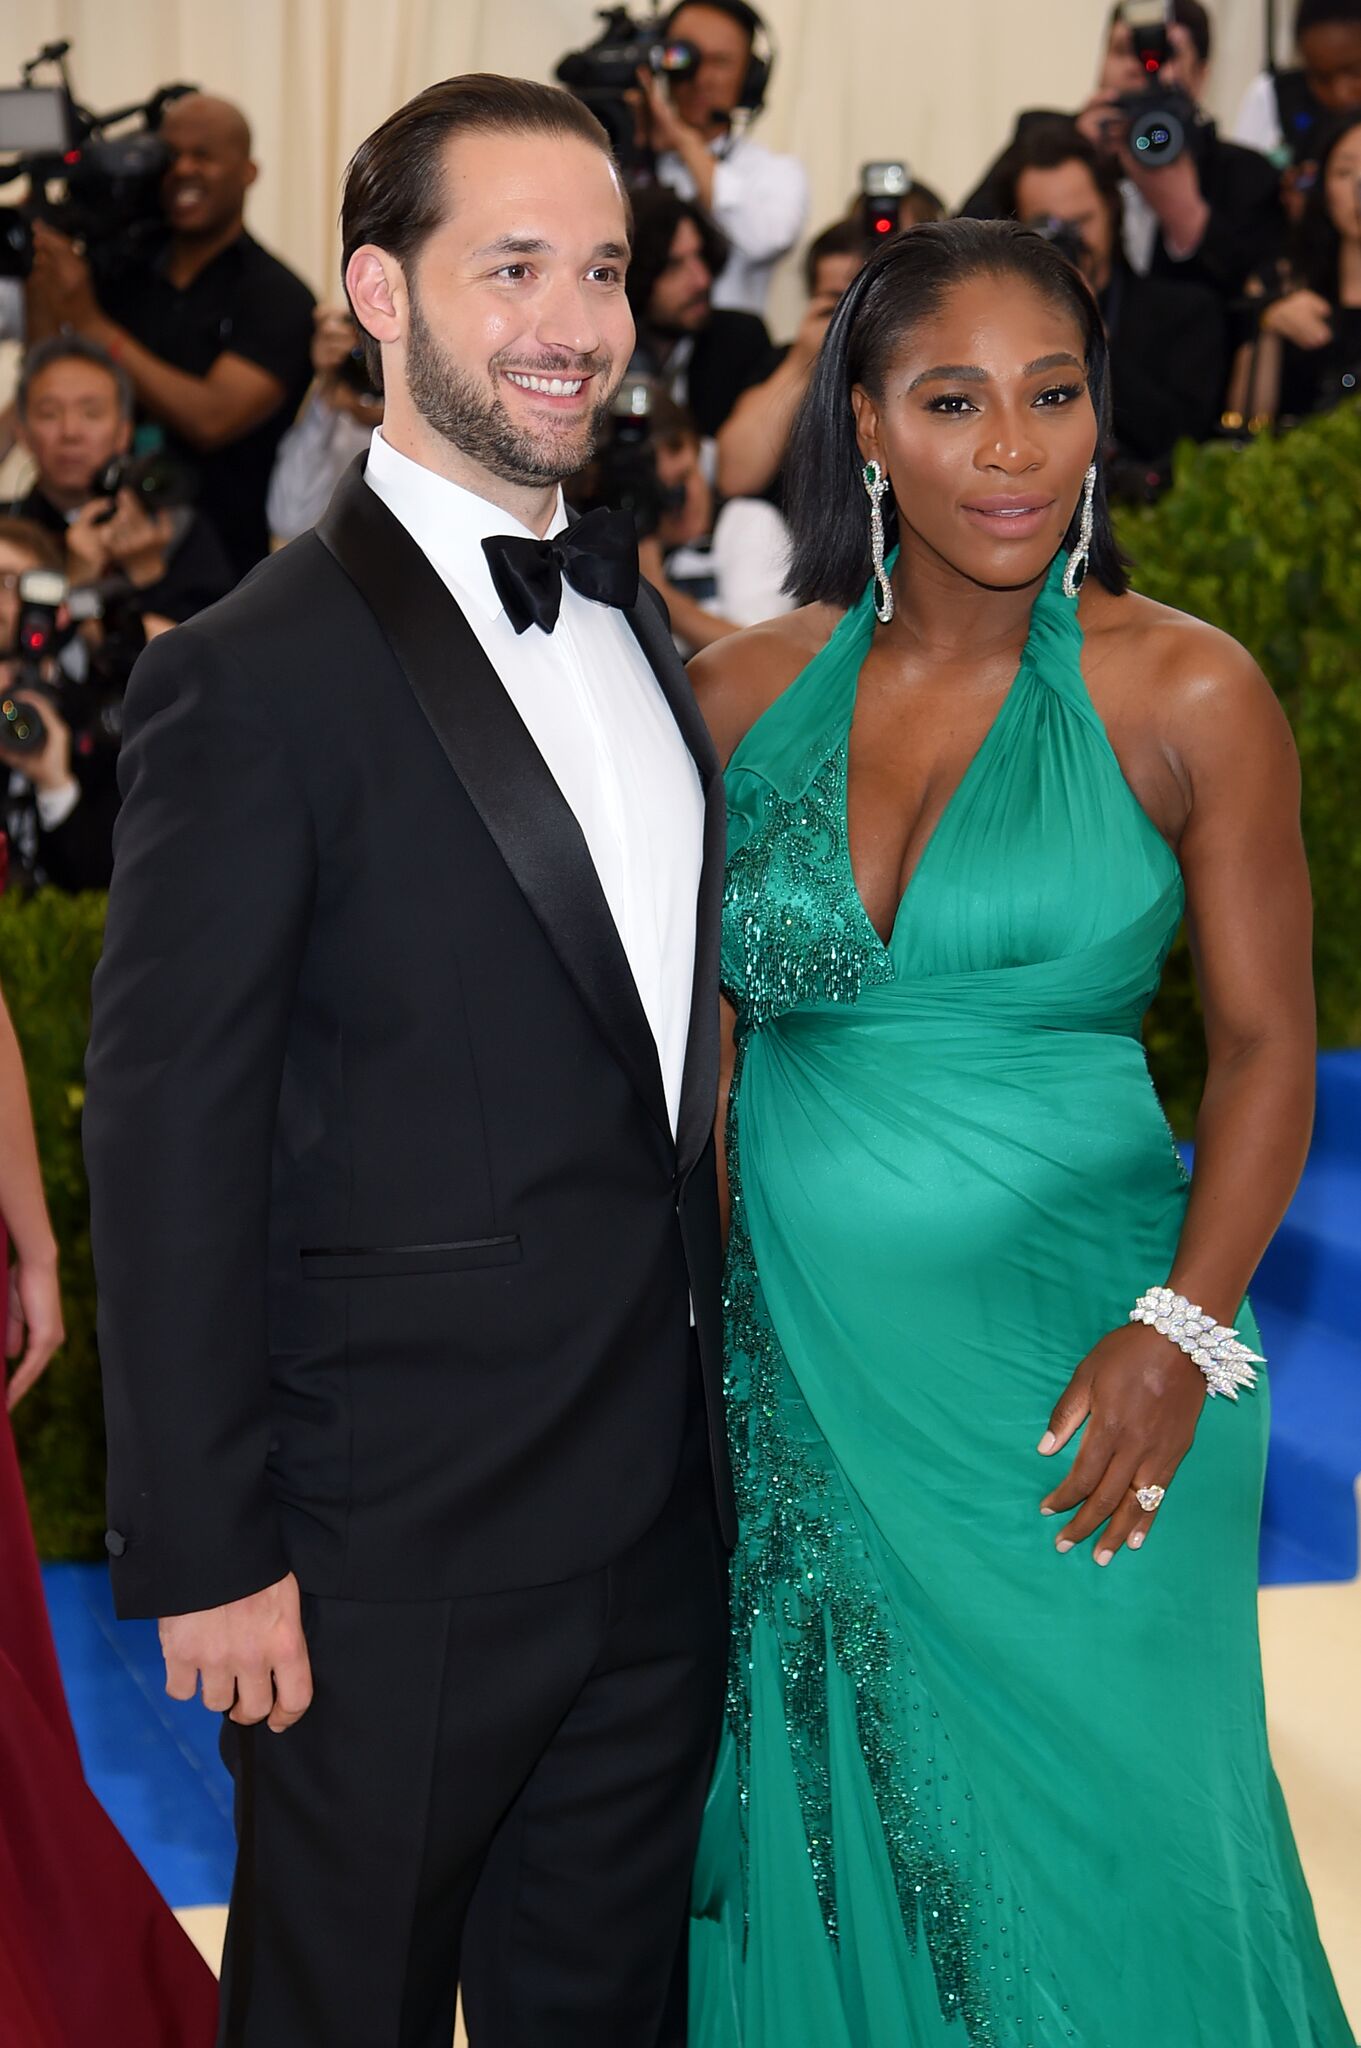 Alexis Ohanian and Serena Williams at the "Rei Kawakubo/Comme des Garcons: Art Of The In-Between" Costume Institute Gala at the Metropolitan Museum of Art on May 1, 2017. | Source: Getty Images